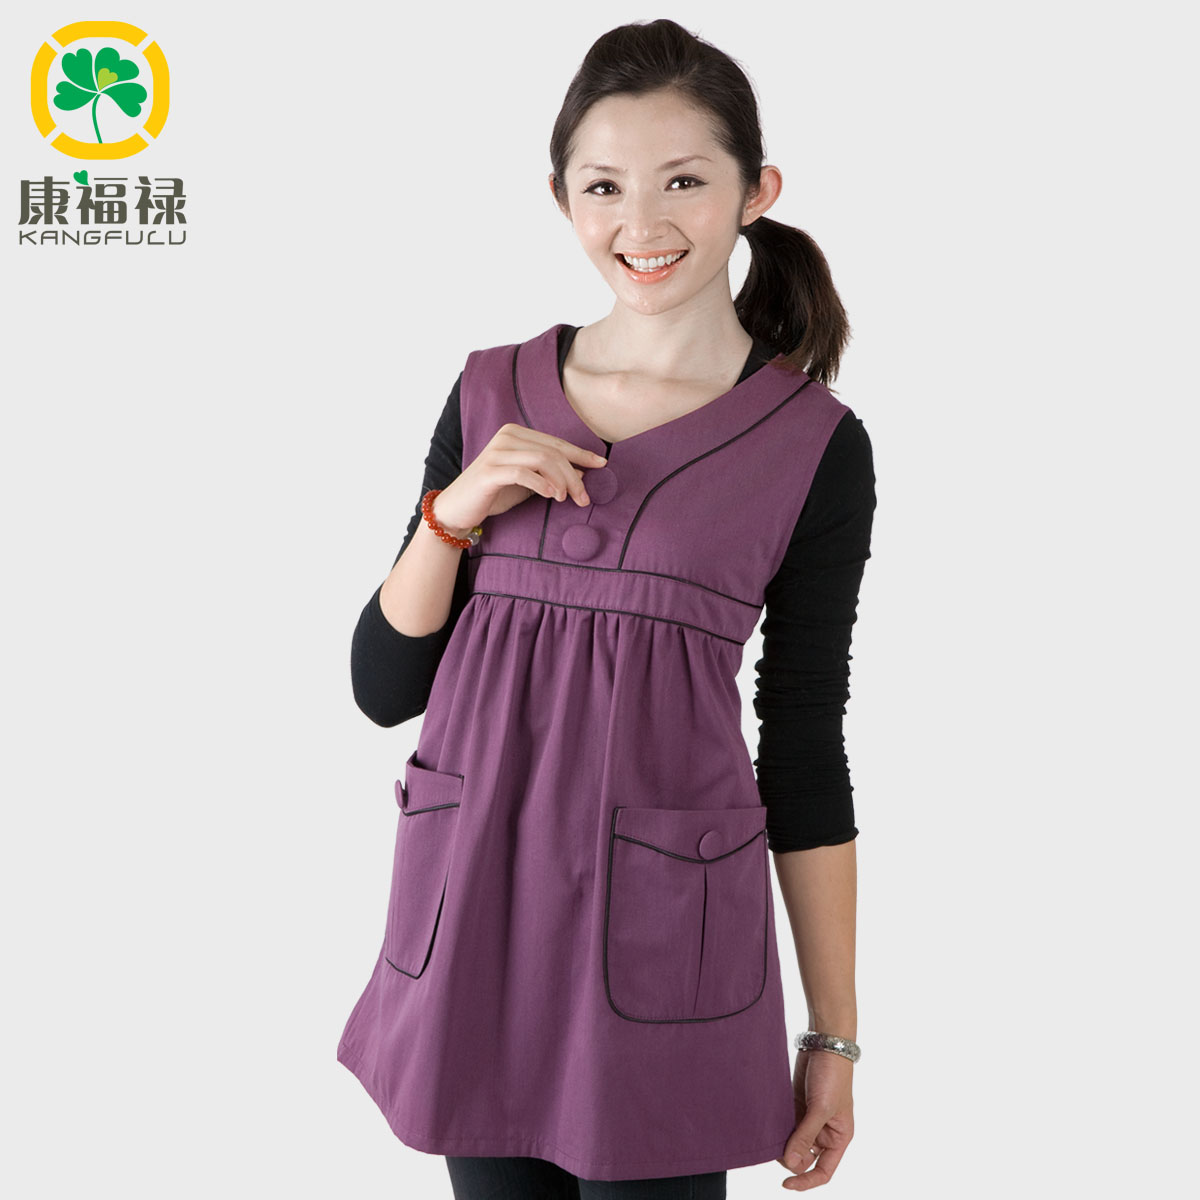 Radiation-resistant maternity clothing radiation-resistant clothes 908